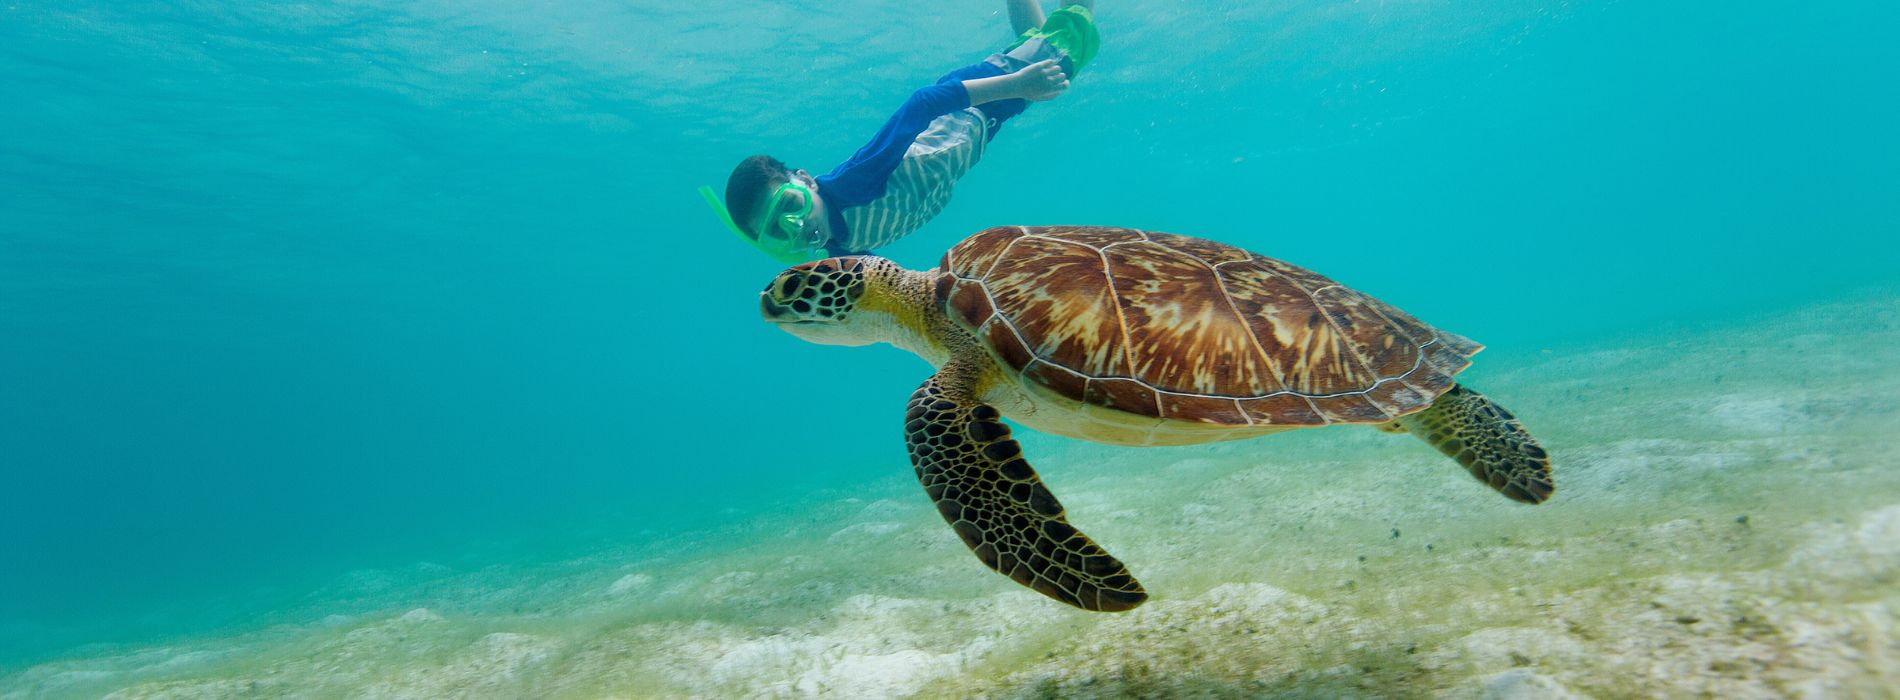 Best Place to Snorkel with Sea Turtles - Madeinsea©